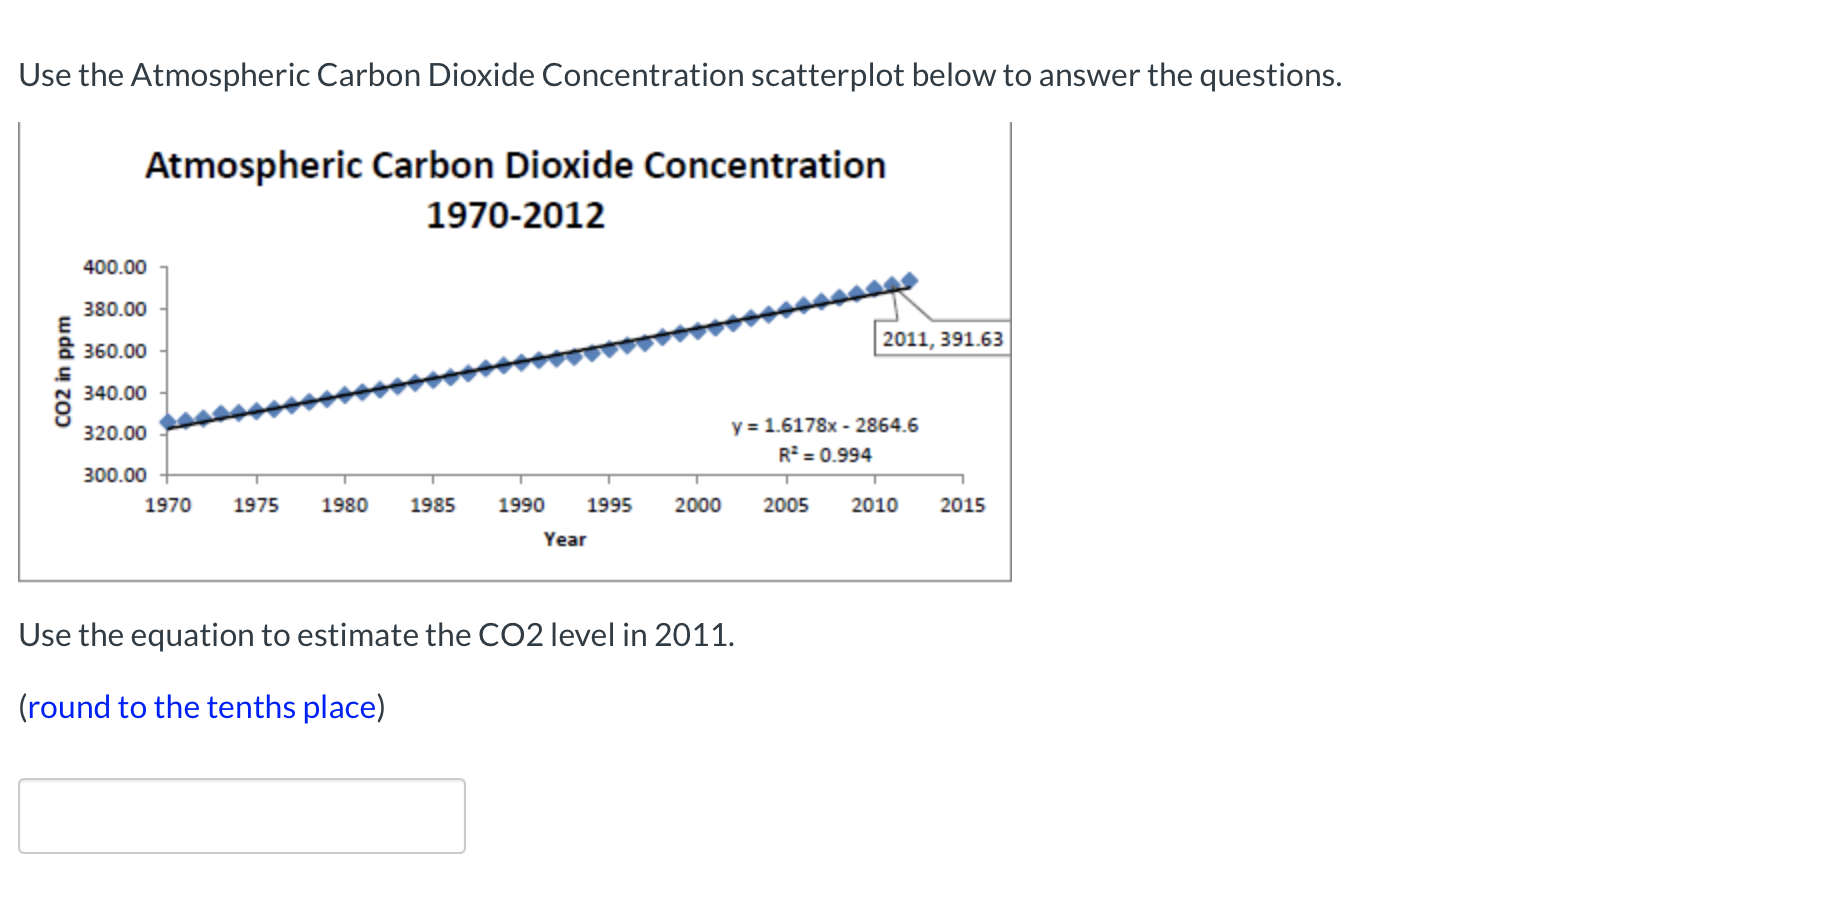 Use the Atmospheric Carbon Dioxide Concentration scatterplot below to answer the questions.
Atmospheric Carbon Dioxide Concentration
1970-2012
400.00
380.00
2011, 391.63
360.00
340.00
y = 1.6178x - 2864.6
R = 0.994
320.00
300.00
1970
1975
1980
1985
1990
1995
2000
2005
2010
2015
Year
Use the equation to estimate the CO2 level in 2011.
(round to the tenths place)
wdd u zoɔ
